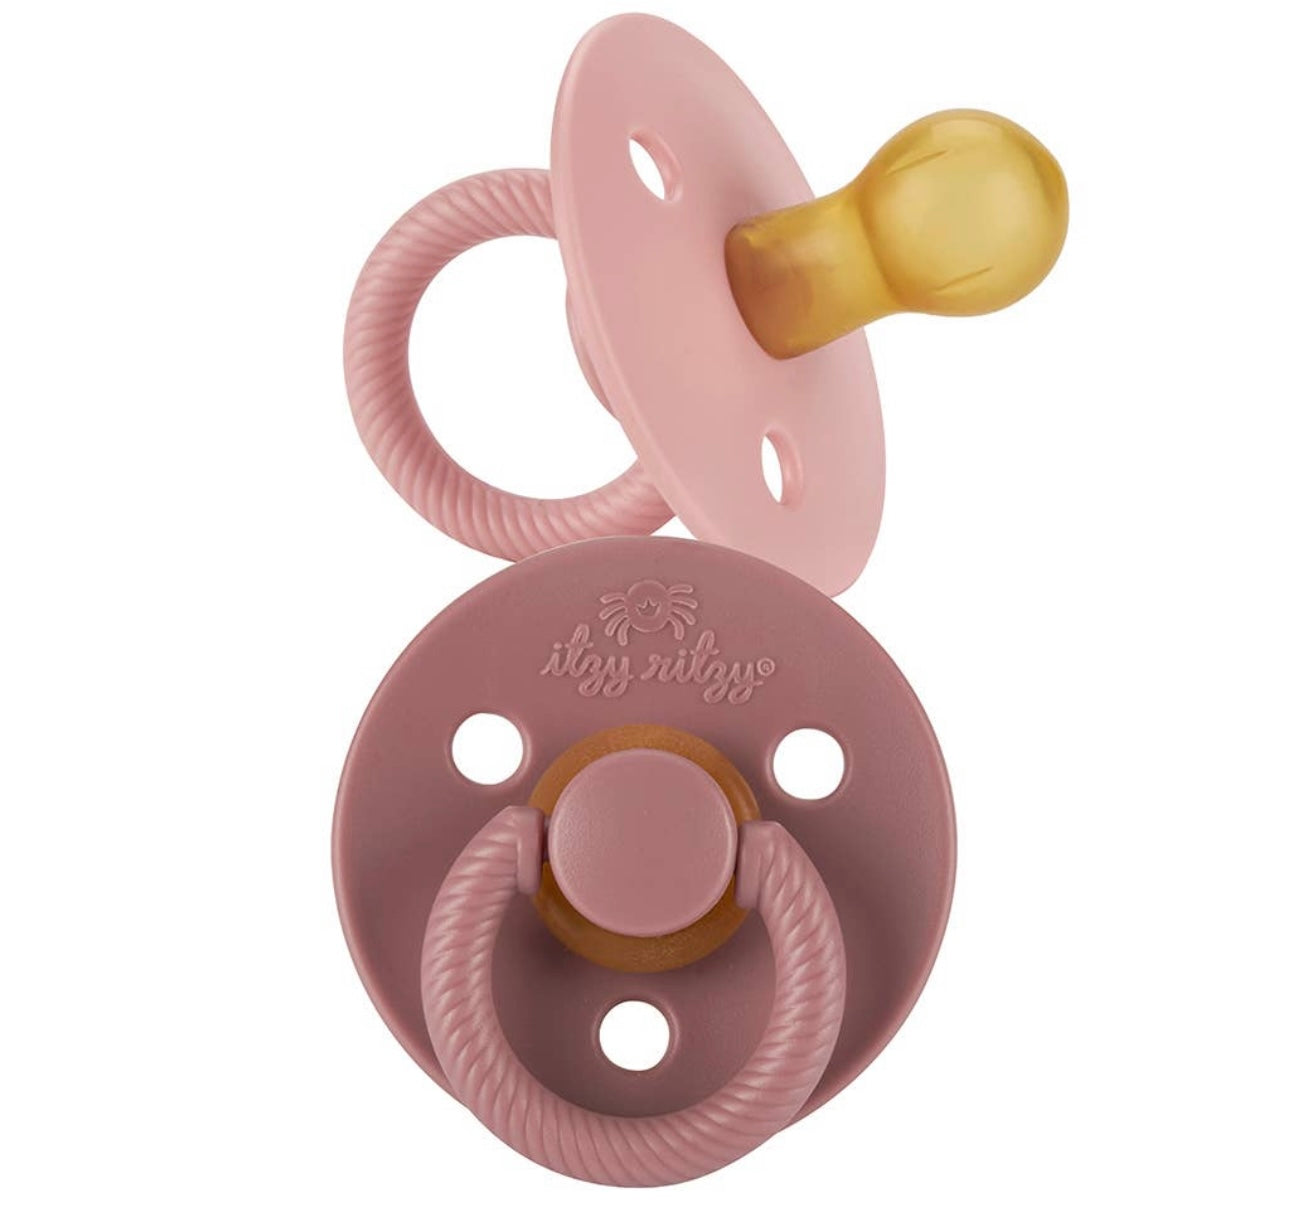 NEW! Natural Rubber Soothing Pacifiers